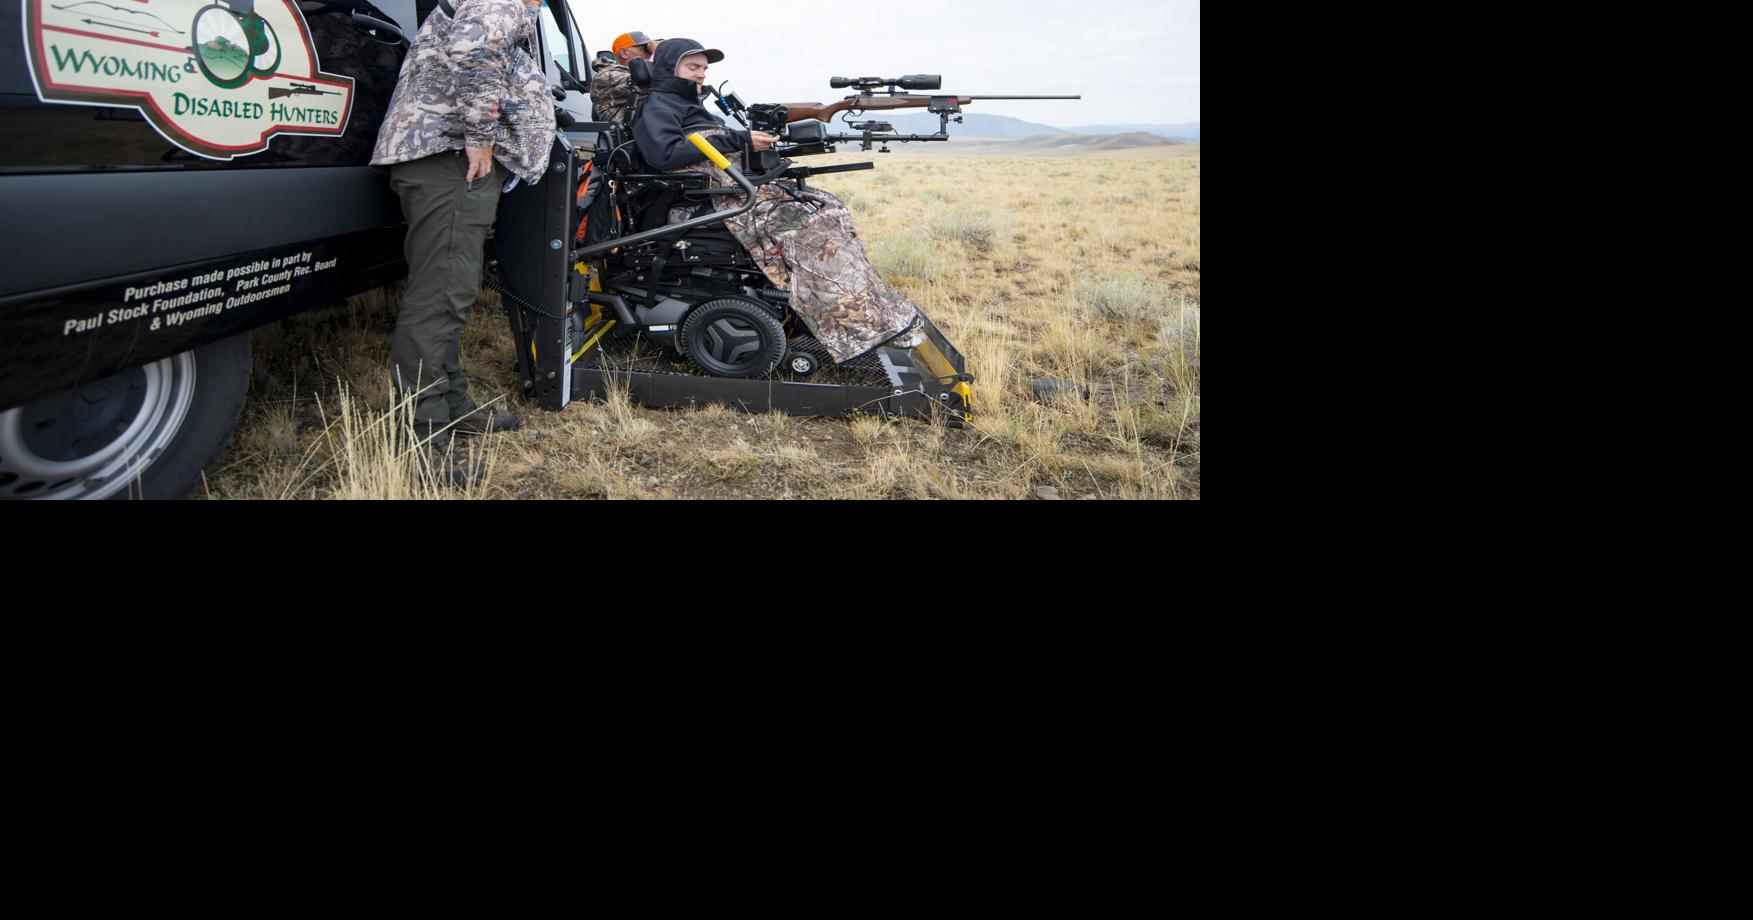 Wyoming Disabled Hunters host outdoor sports enthusiasts from around the country